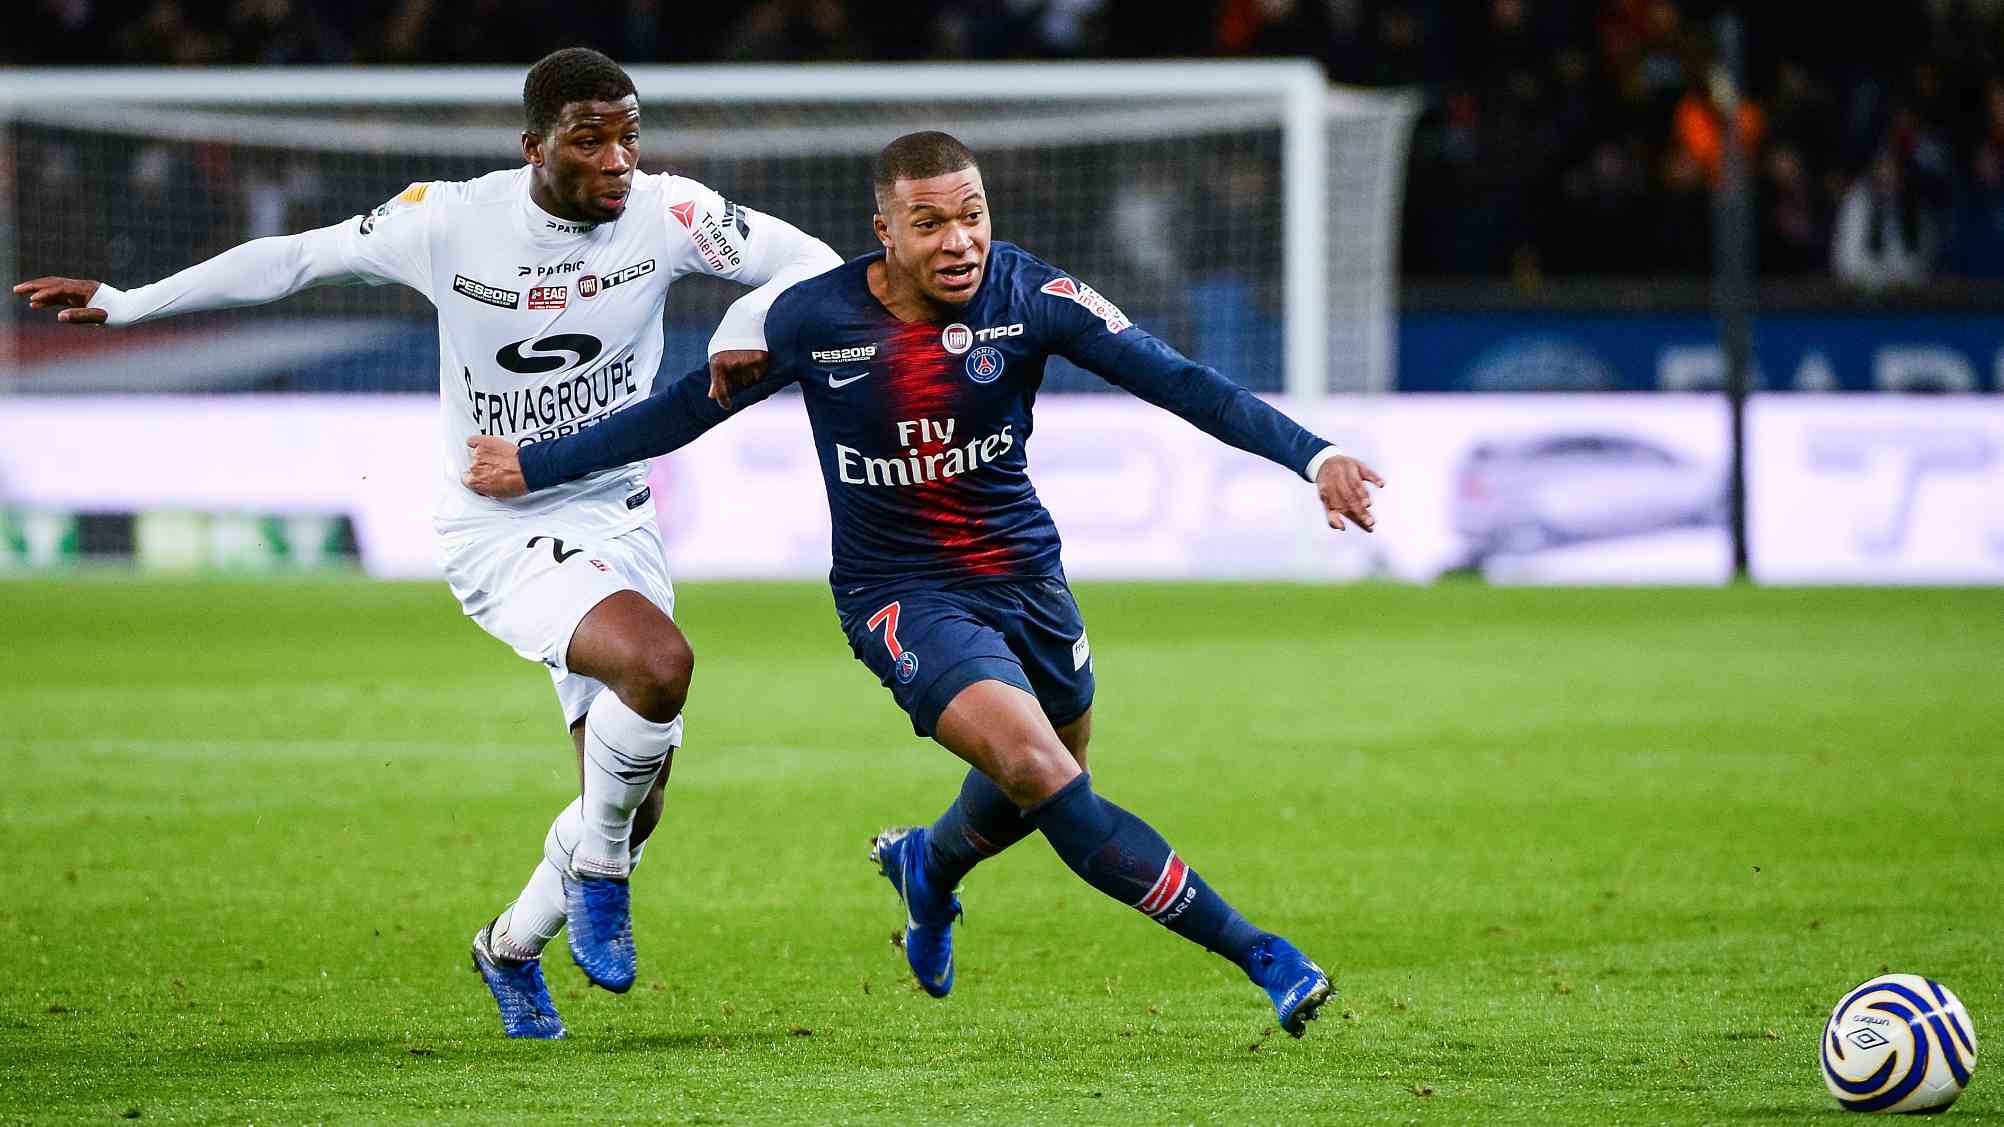 PSG eliminated by Guingamp in French League Cup - CGTN